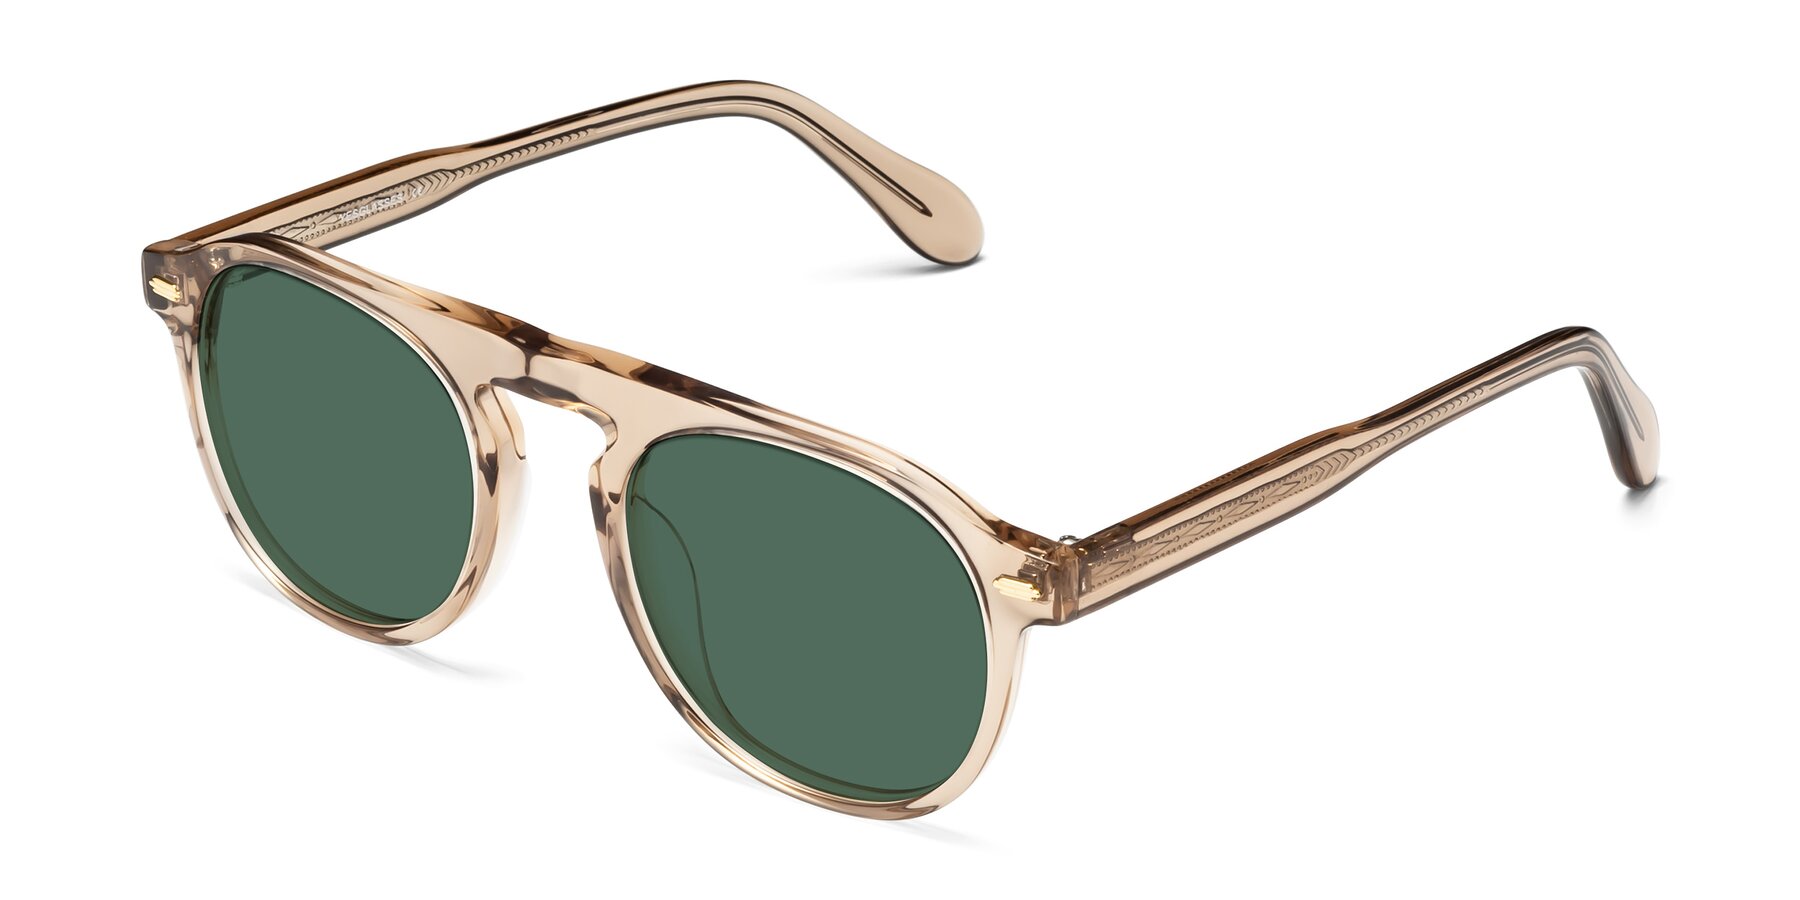 Angle of Mufasa in light Brown with Green Polarized Lenses